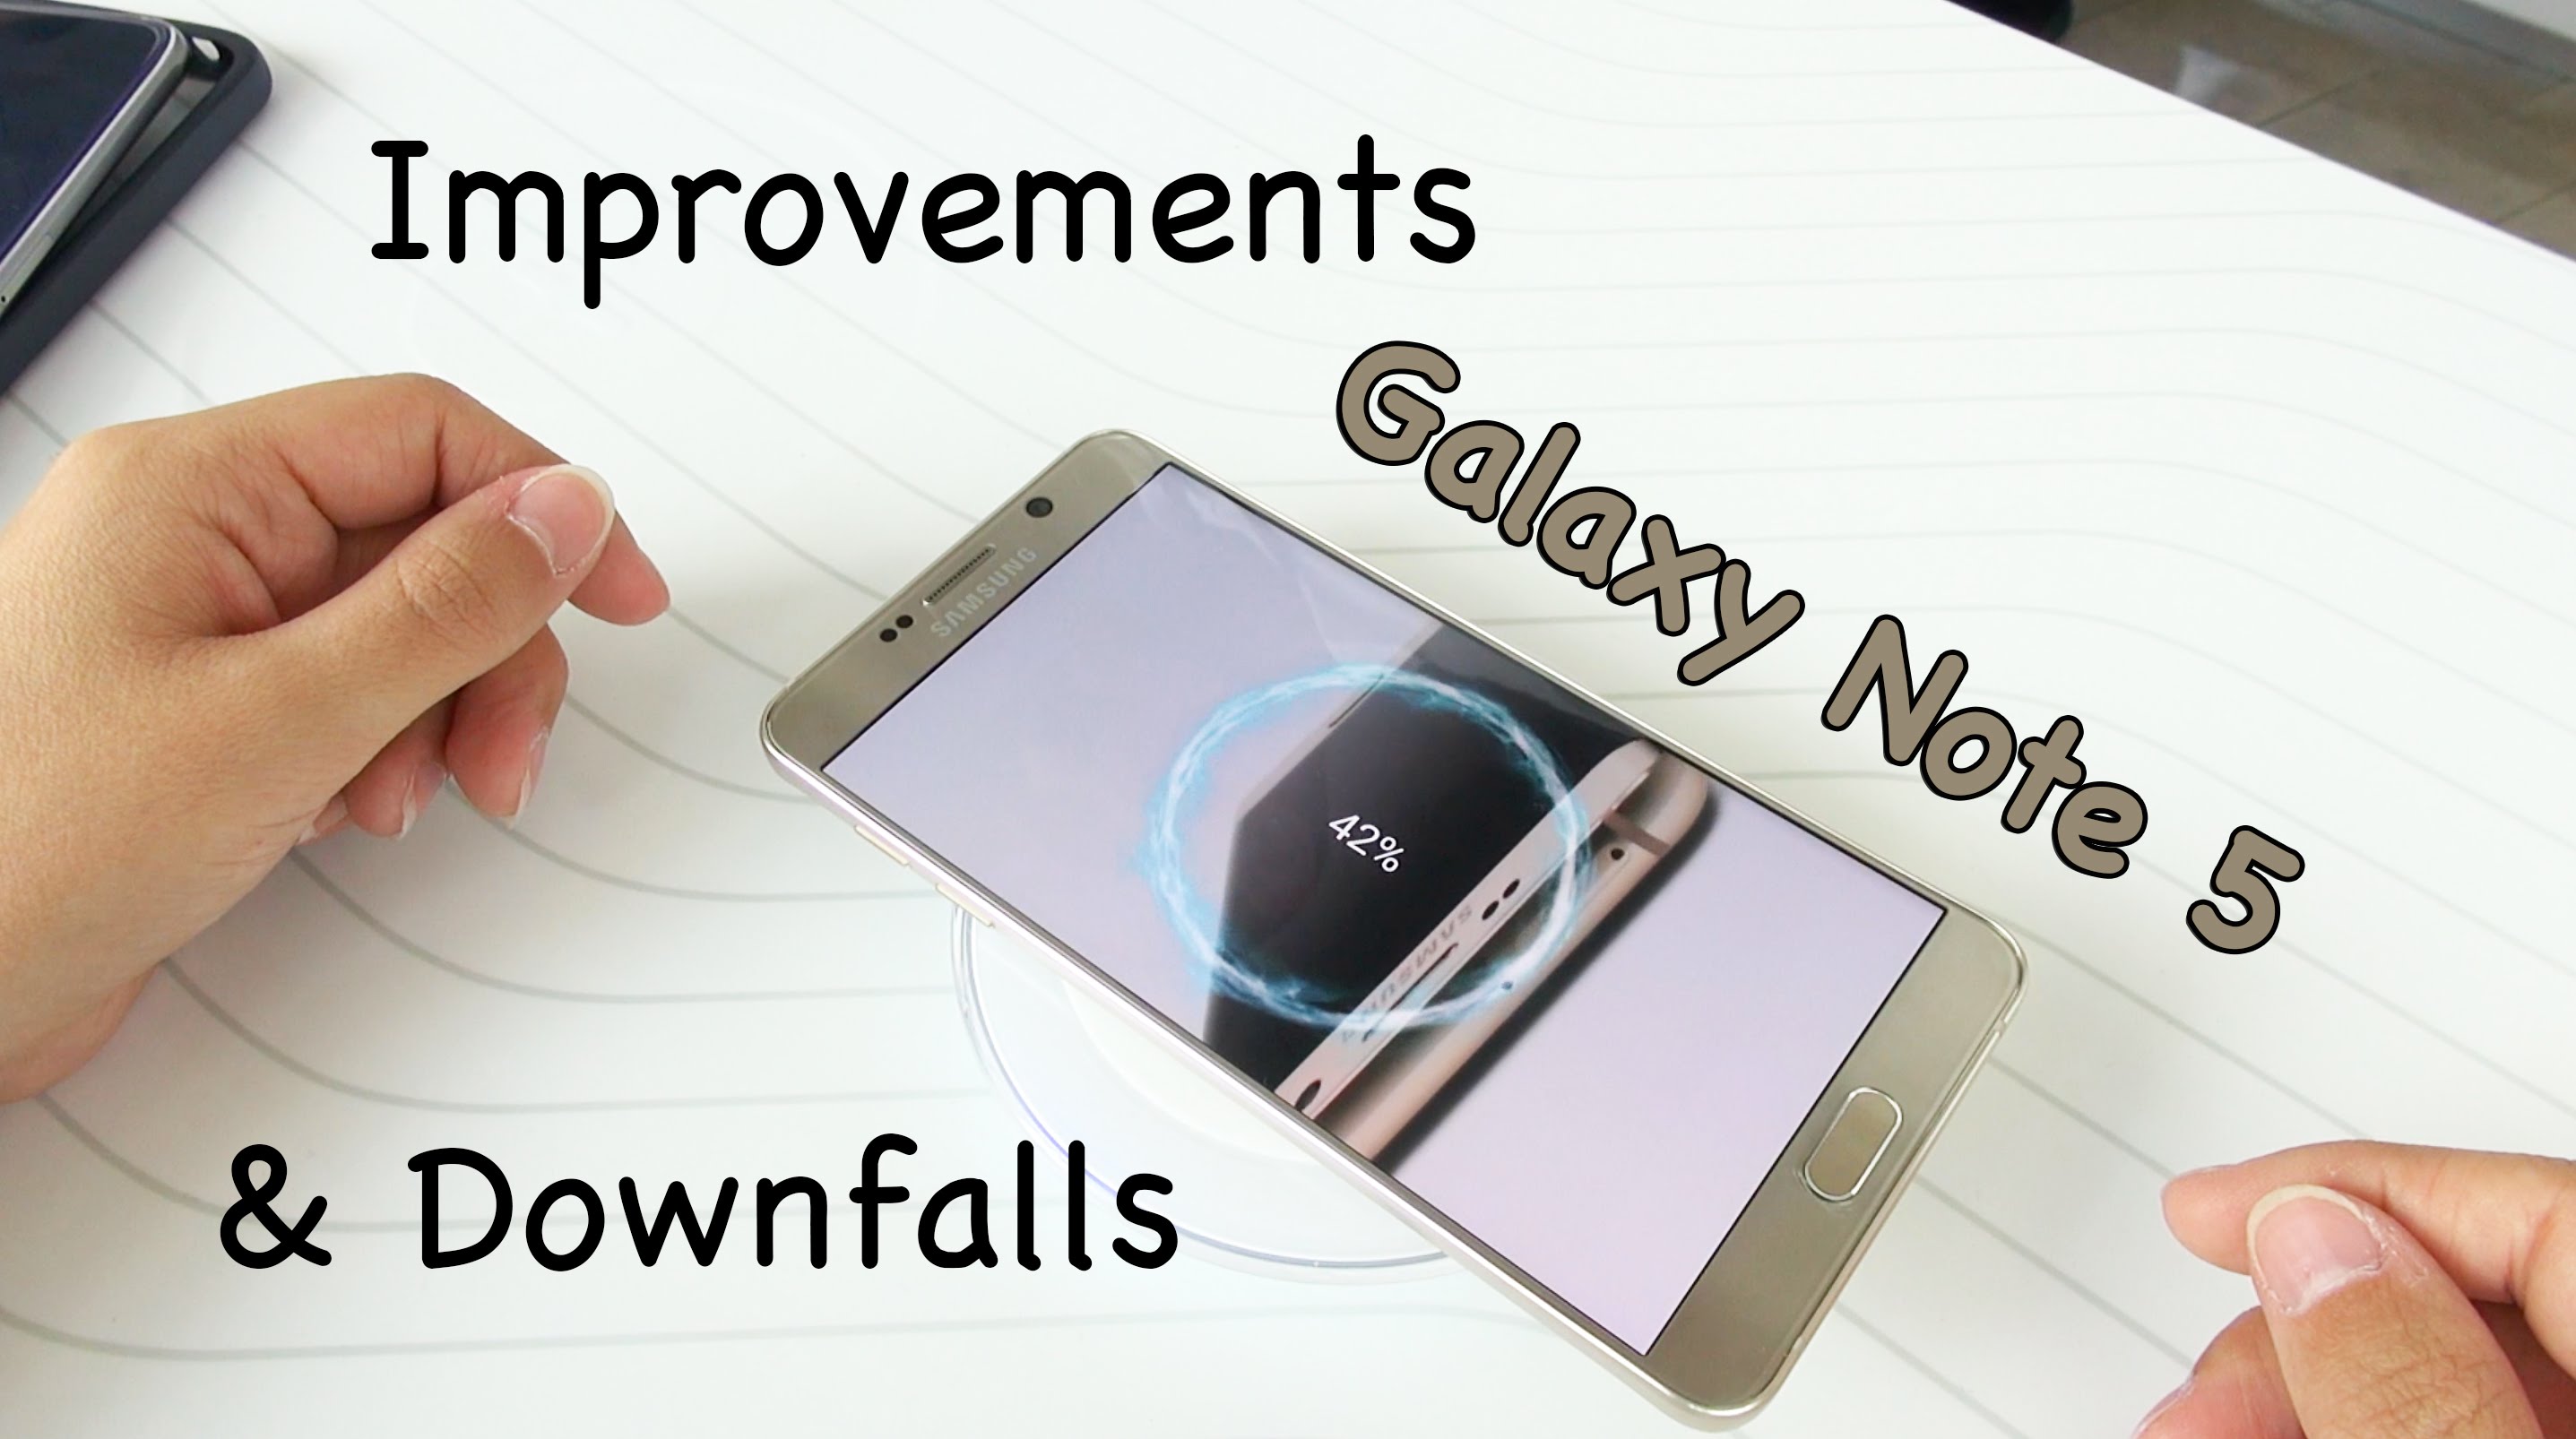 Samsung Galaxy Note 5 Downfalls and Improvements: Hands On